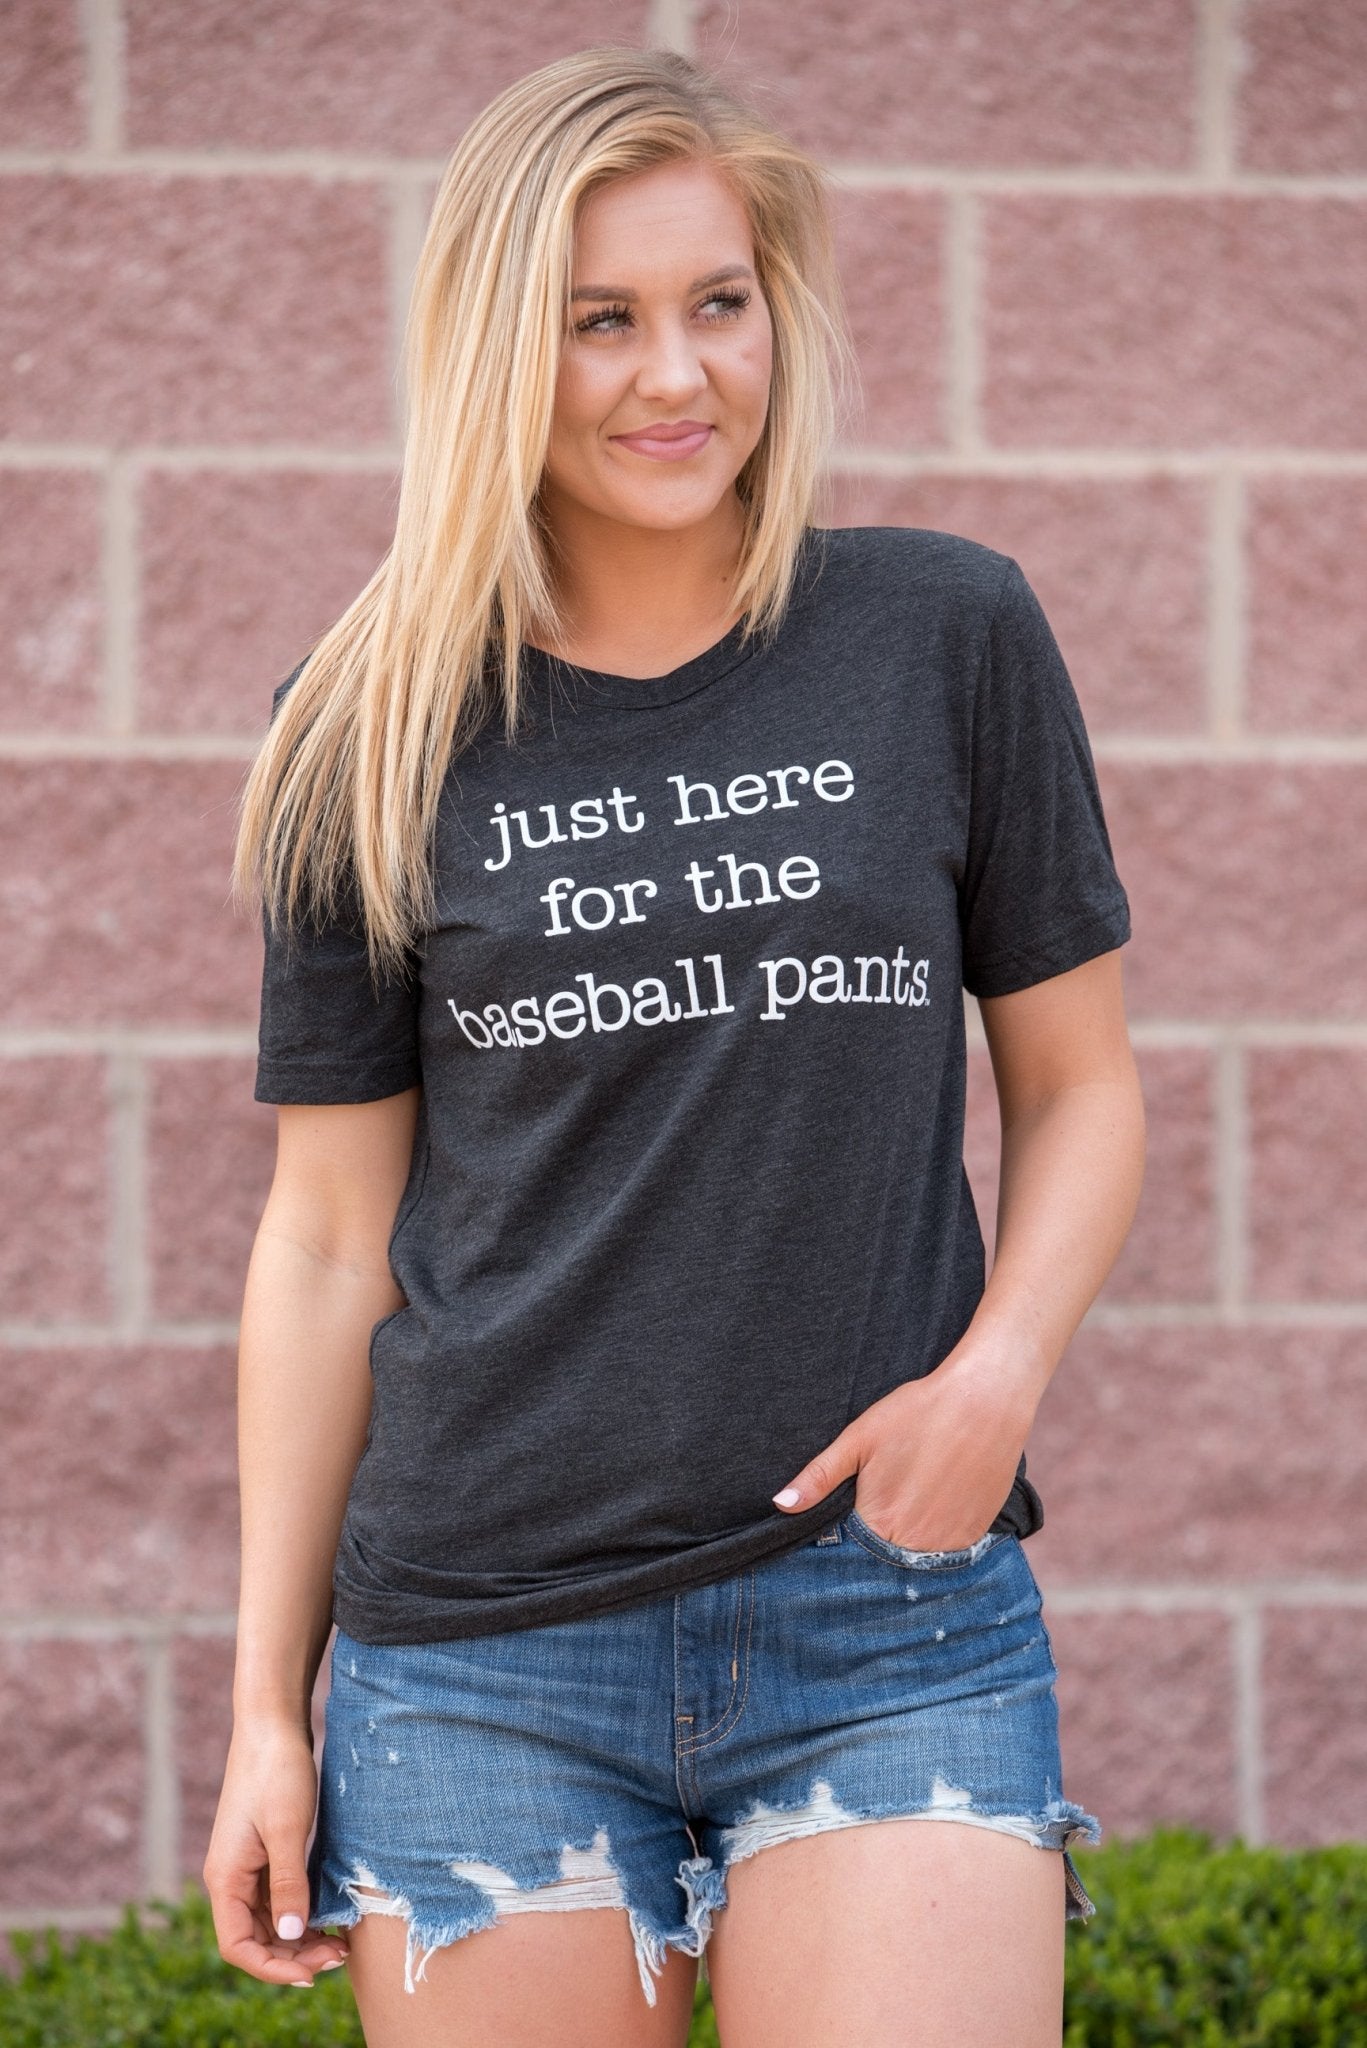 Just here for the baseball pants unisex short sleeve t-shirt charcoal - Stylish T-shirts - Trendy Graphic T-Shirts and Tank Tops at Lush Fashion Lounge Boutique in Oklahoma City